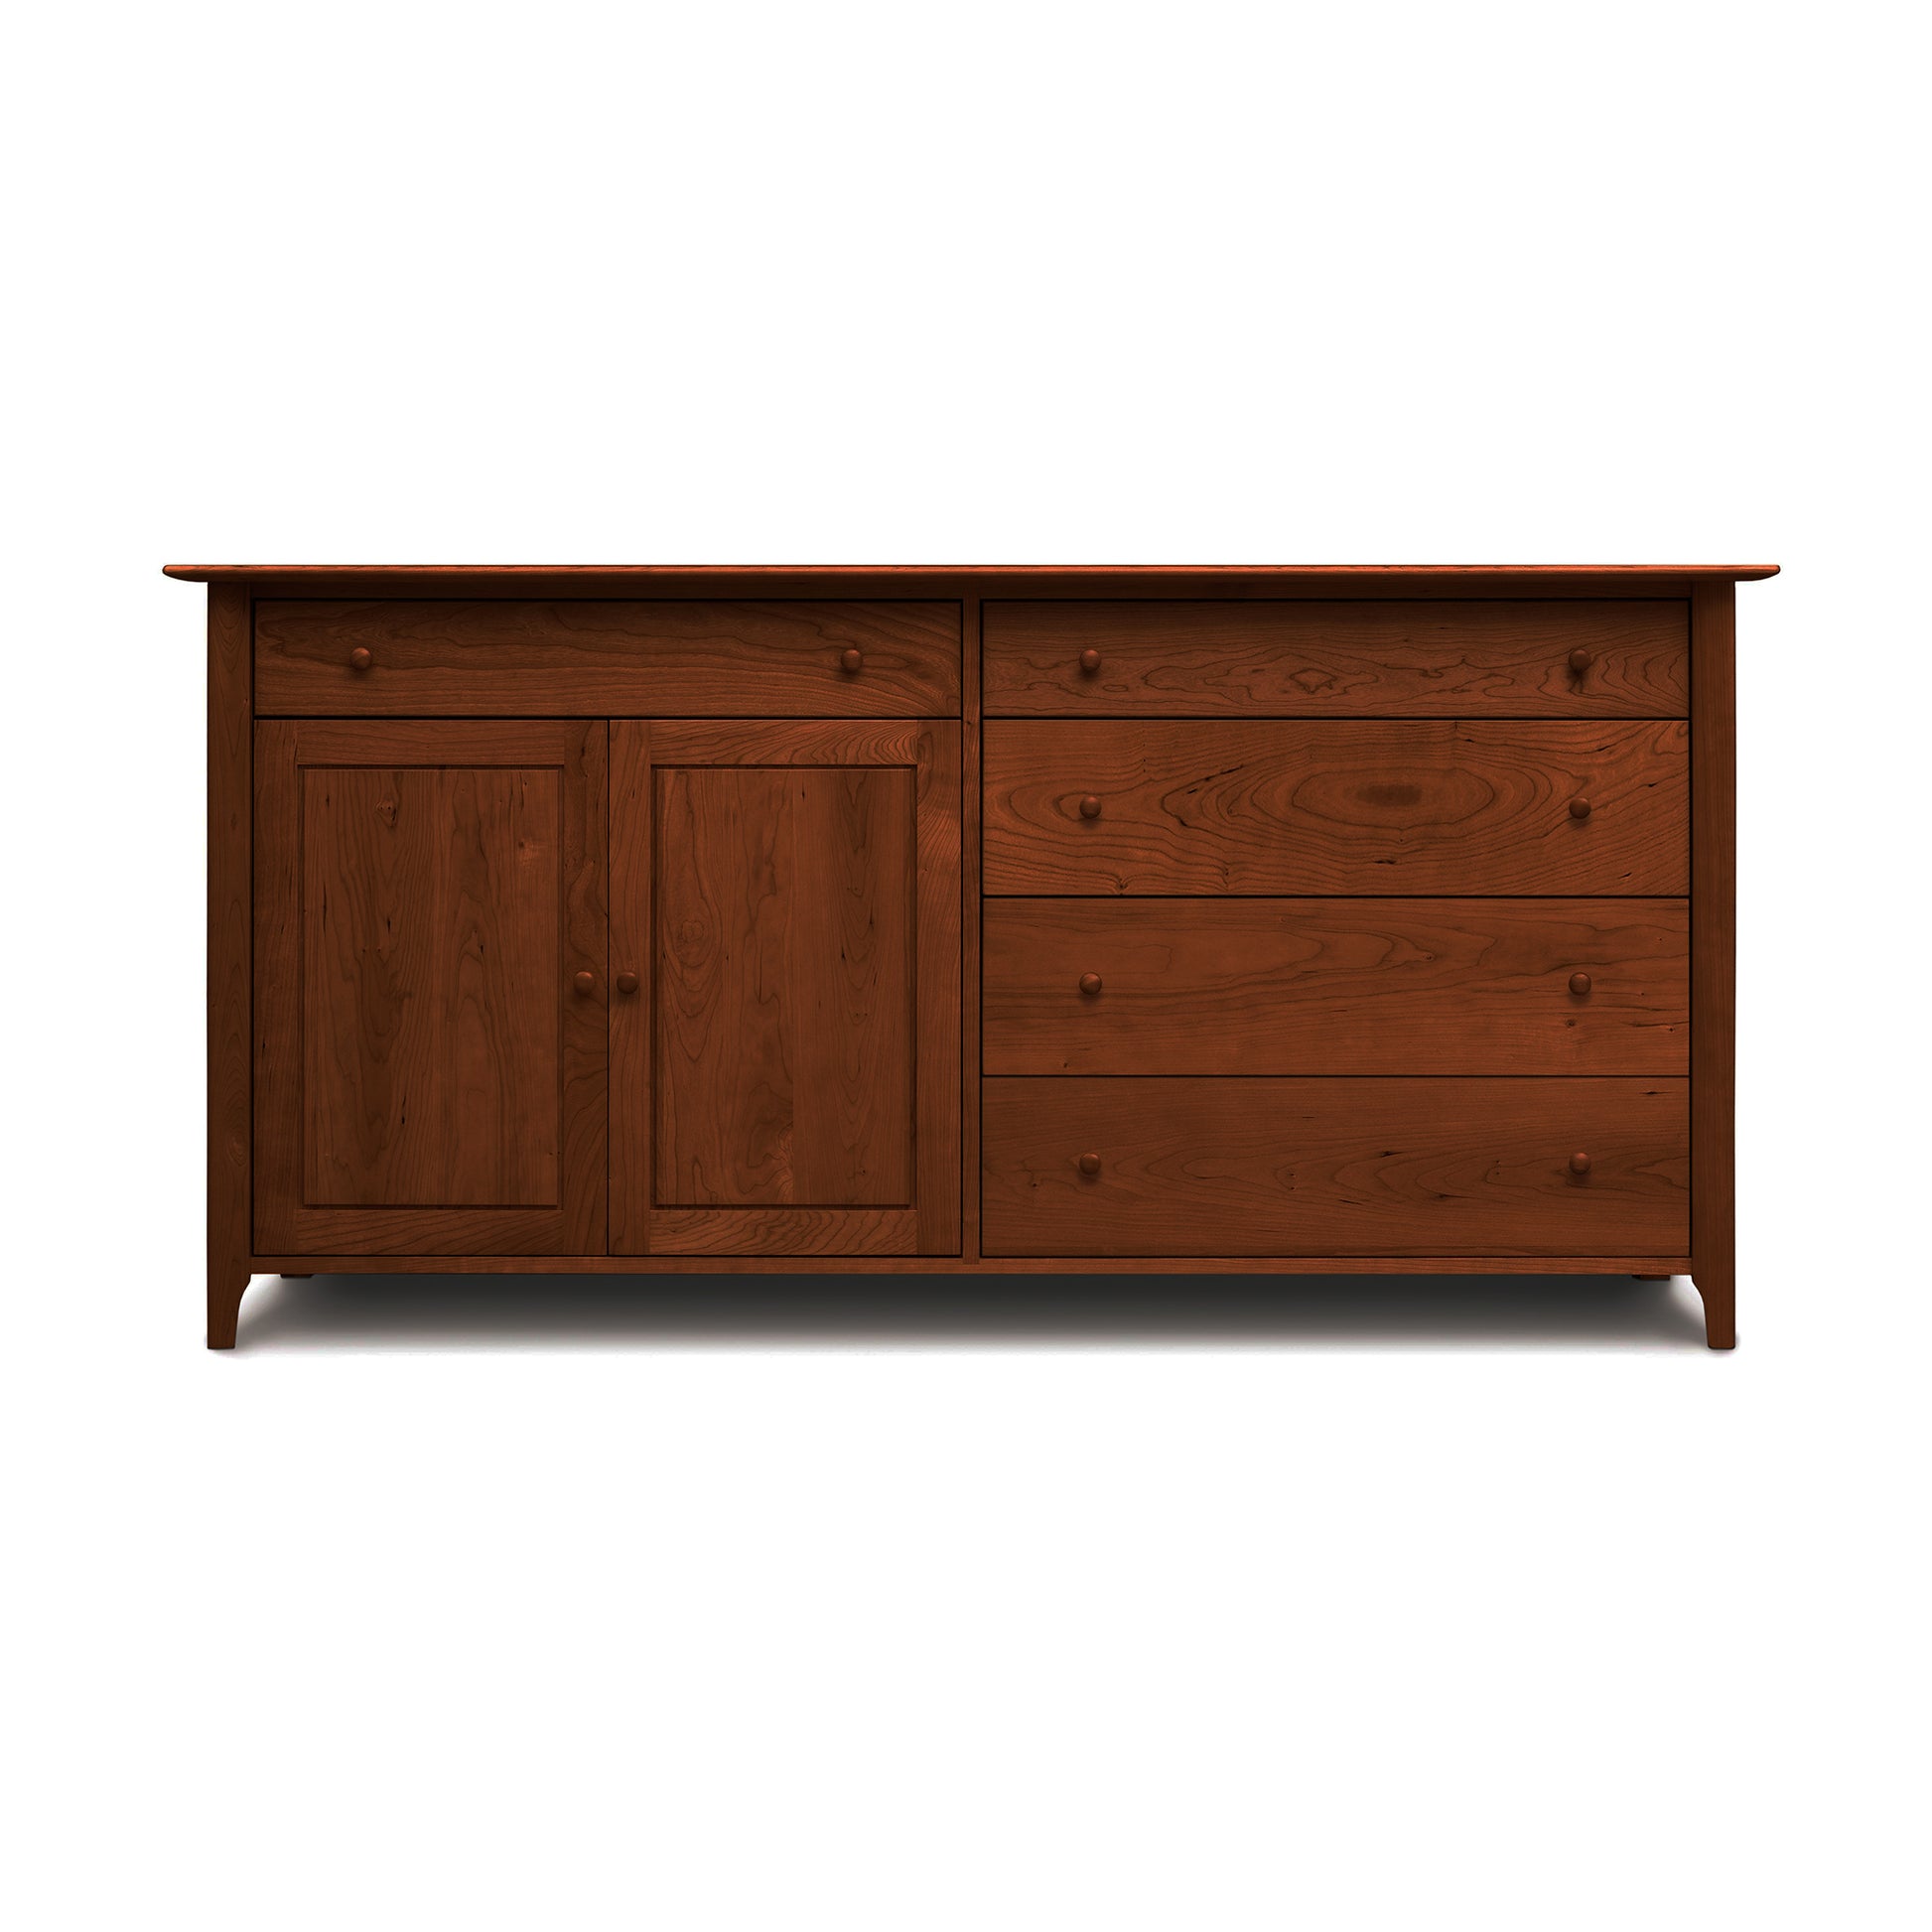 Luxury Sarah 2 Door, 5 Drawer Buffet sideboard with two doors and three drawers on a white background by Copeland Furniture.